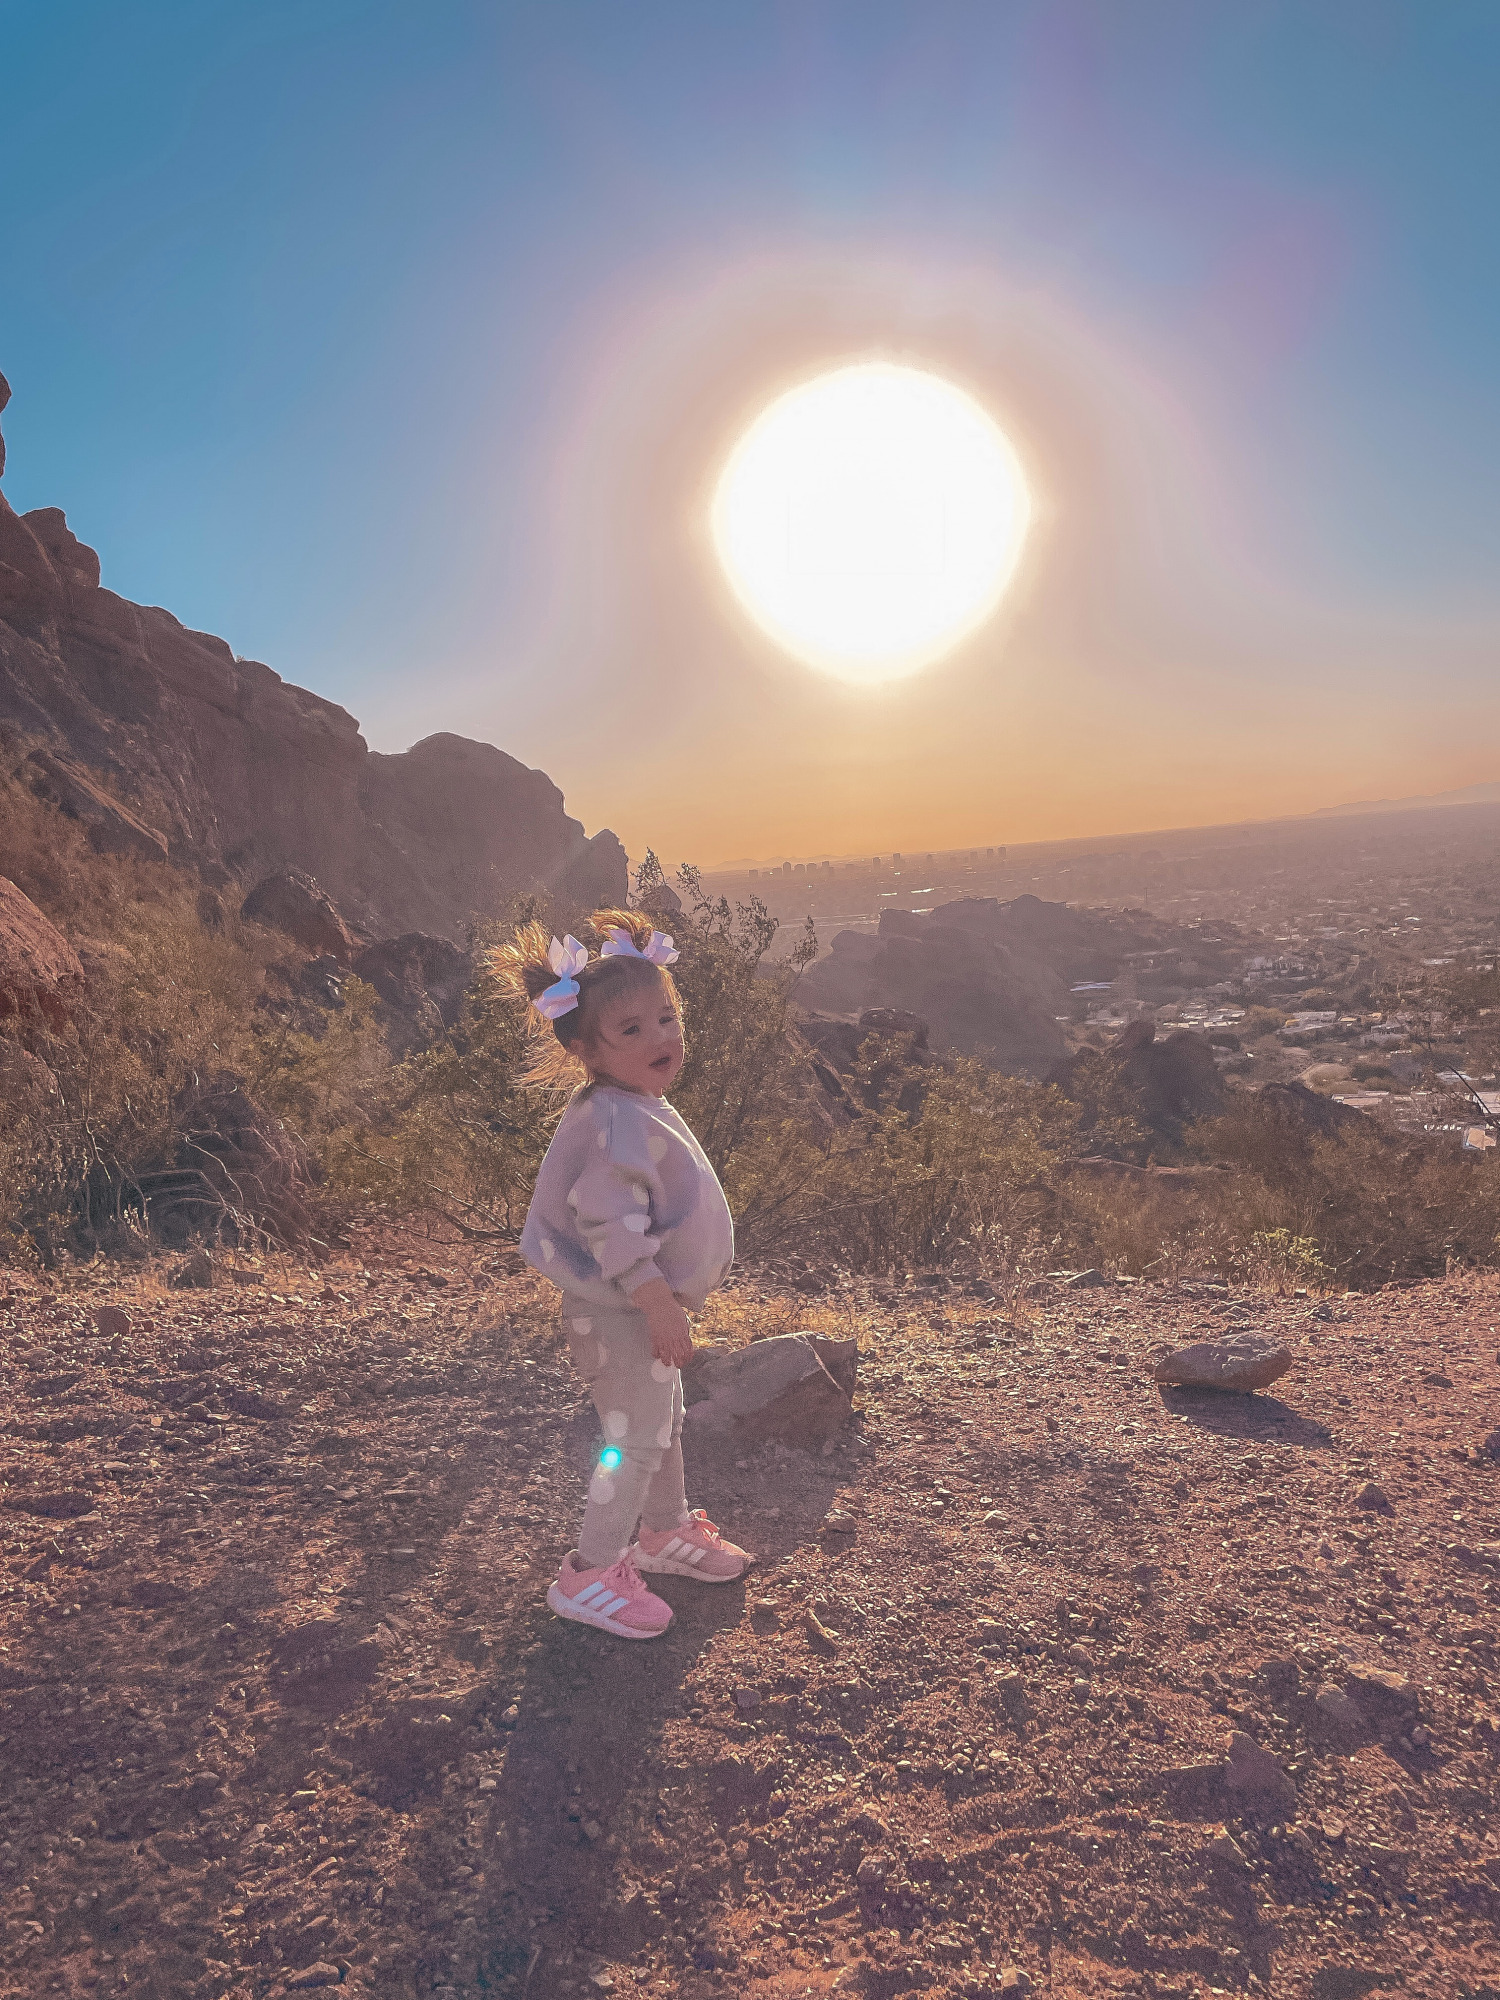 Hiking Outfits by popular US fashion blog, The Sweetest Thing: image of a little girl standing outside and wearing a grey and white polka dot lounge set, sneakers, and matching white hair bows. 